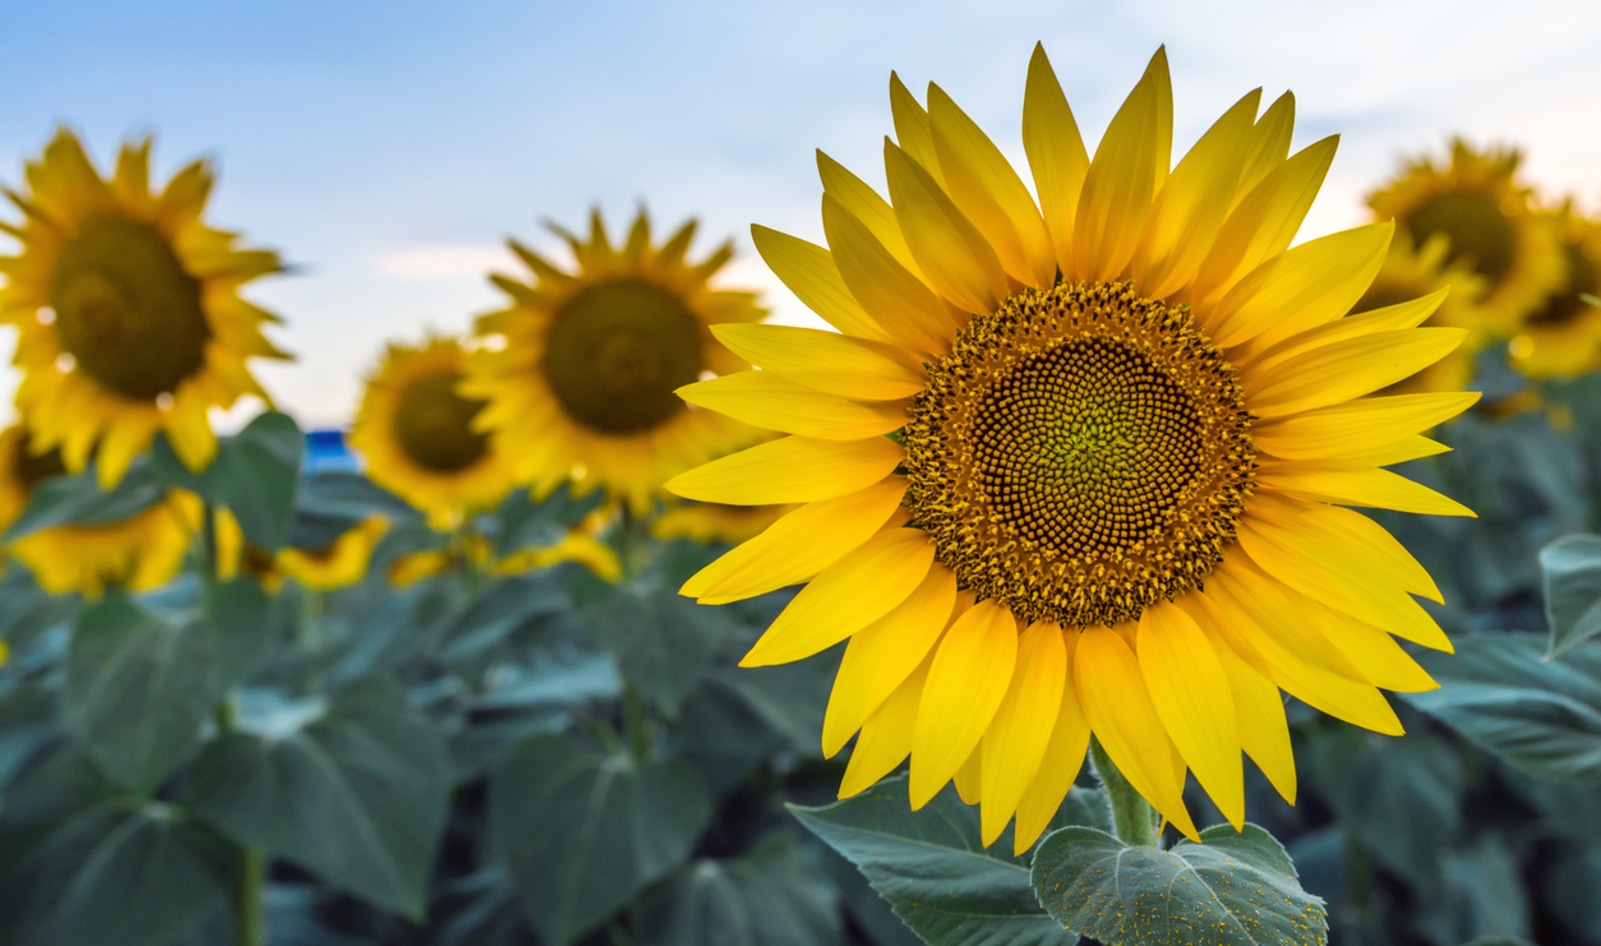 The Sunflower Lover's Guide to Growing, Cooking, and Eating Summer's Favorite Flower